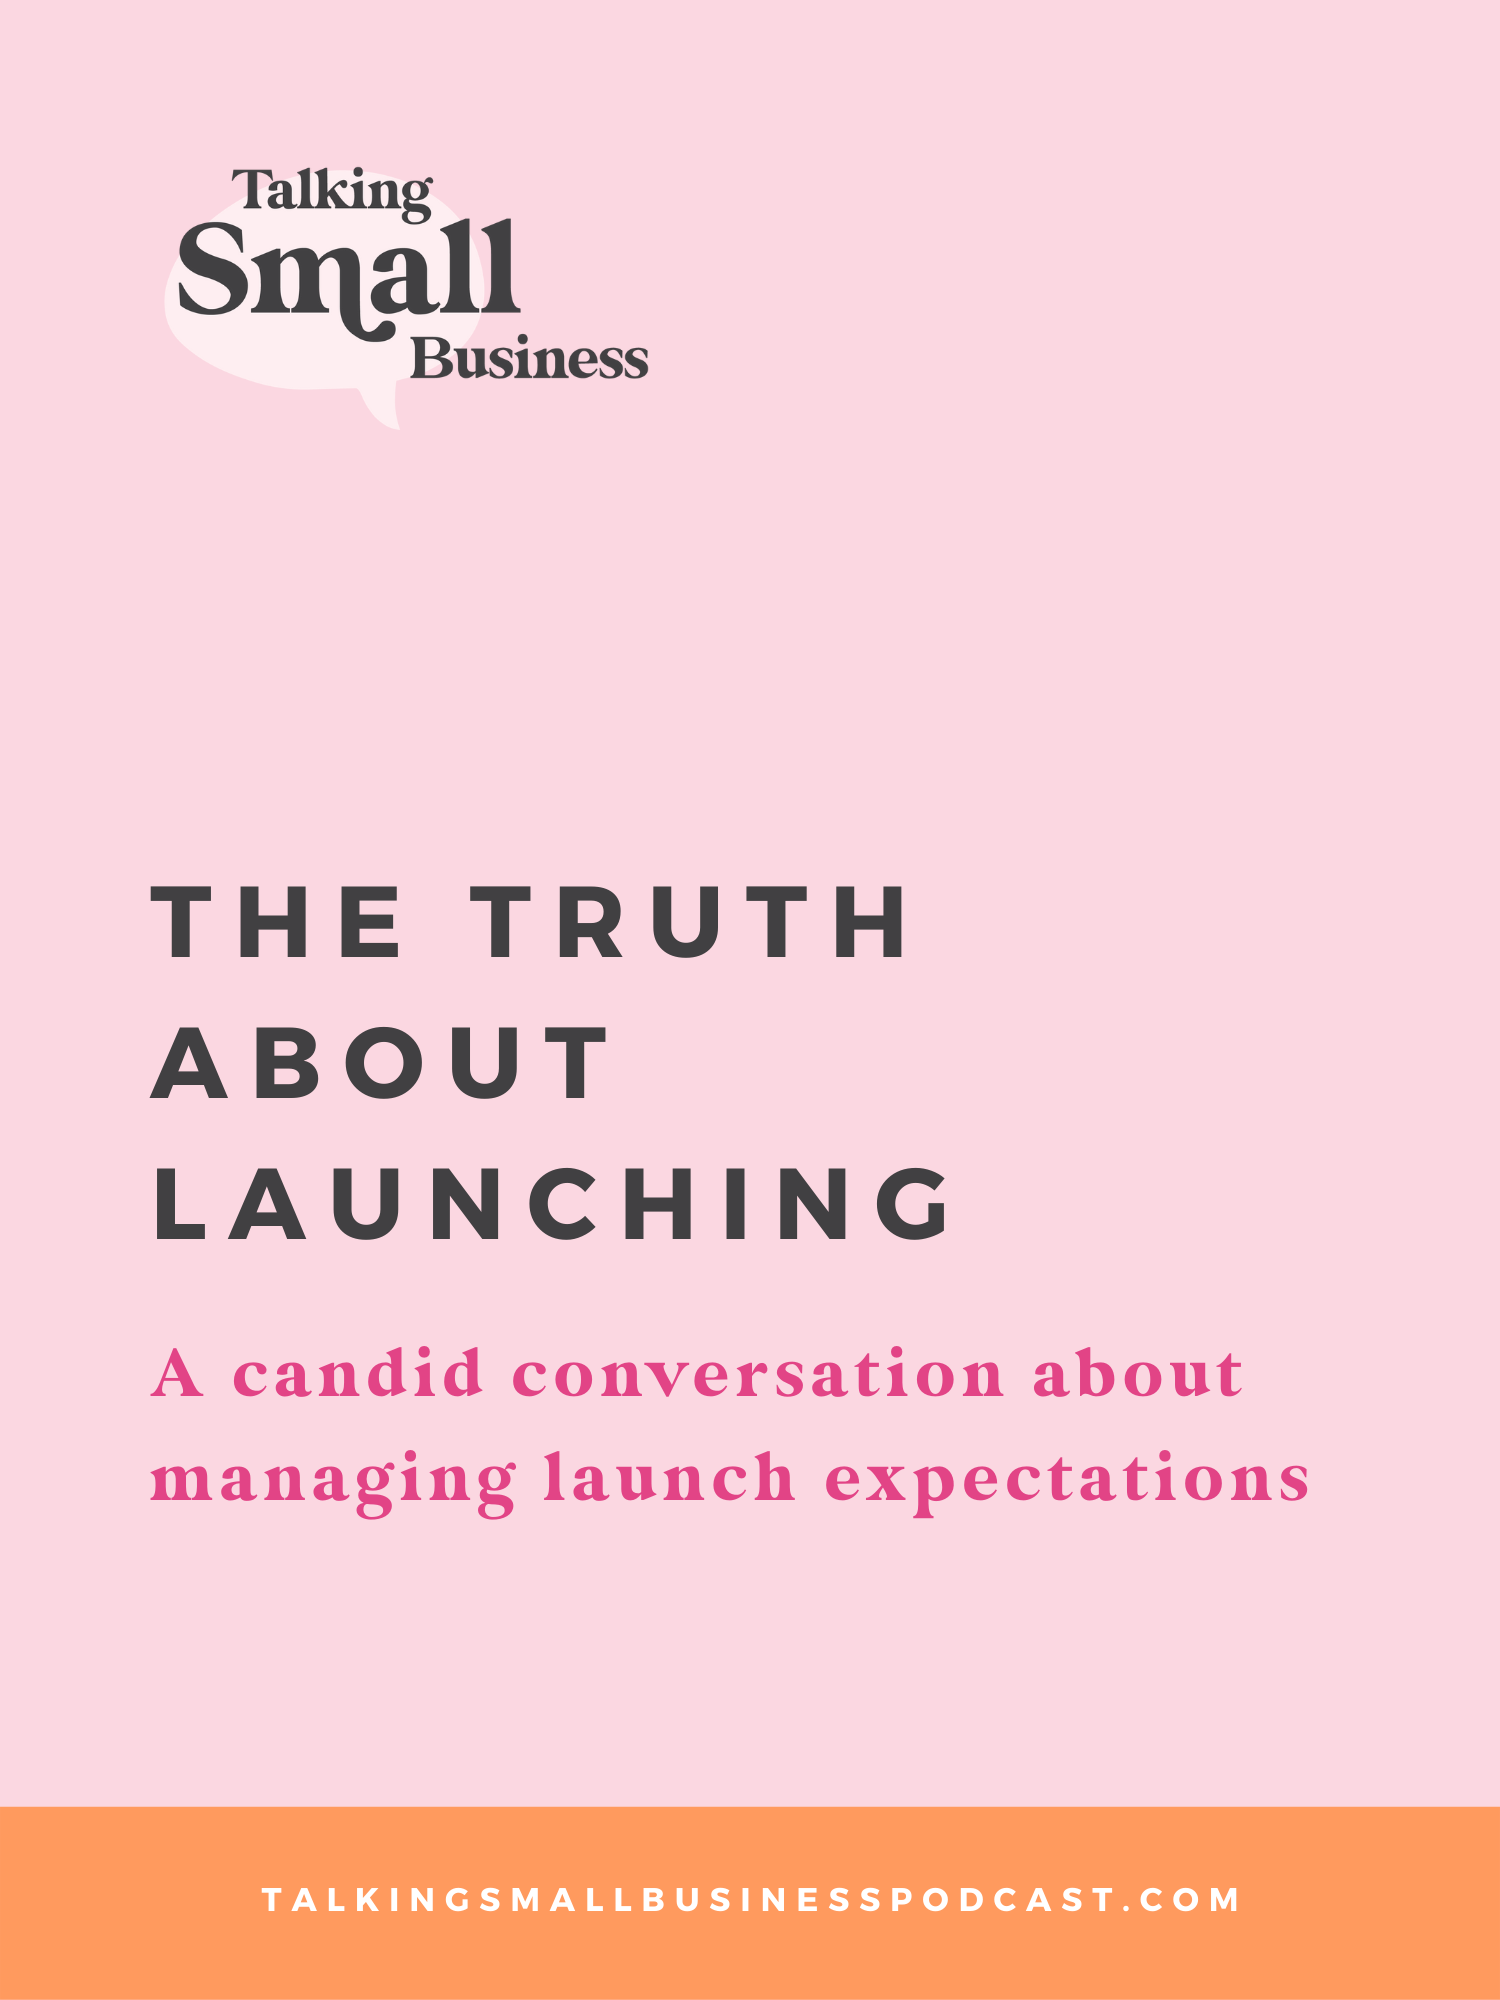 The truth about launching a new business product, offer, or service: a candid conversation on Talking Small Business